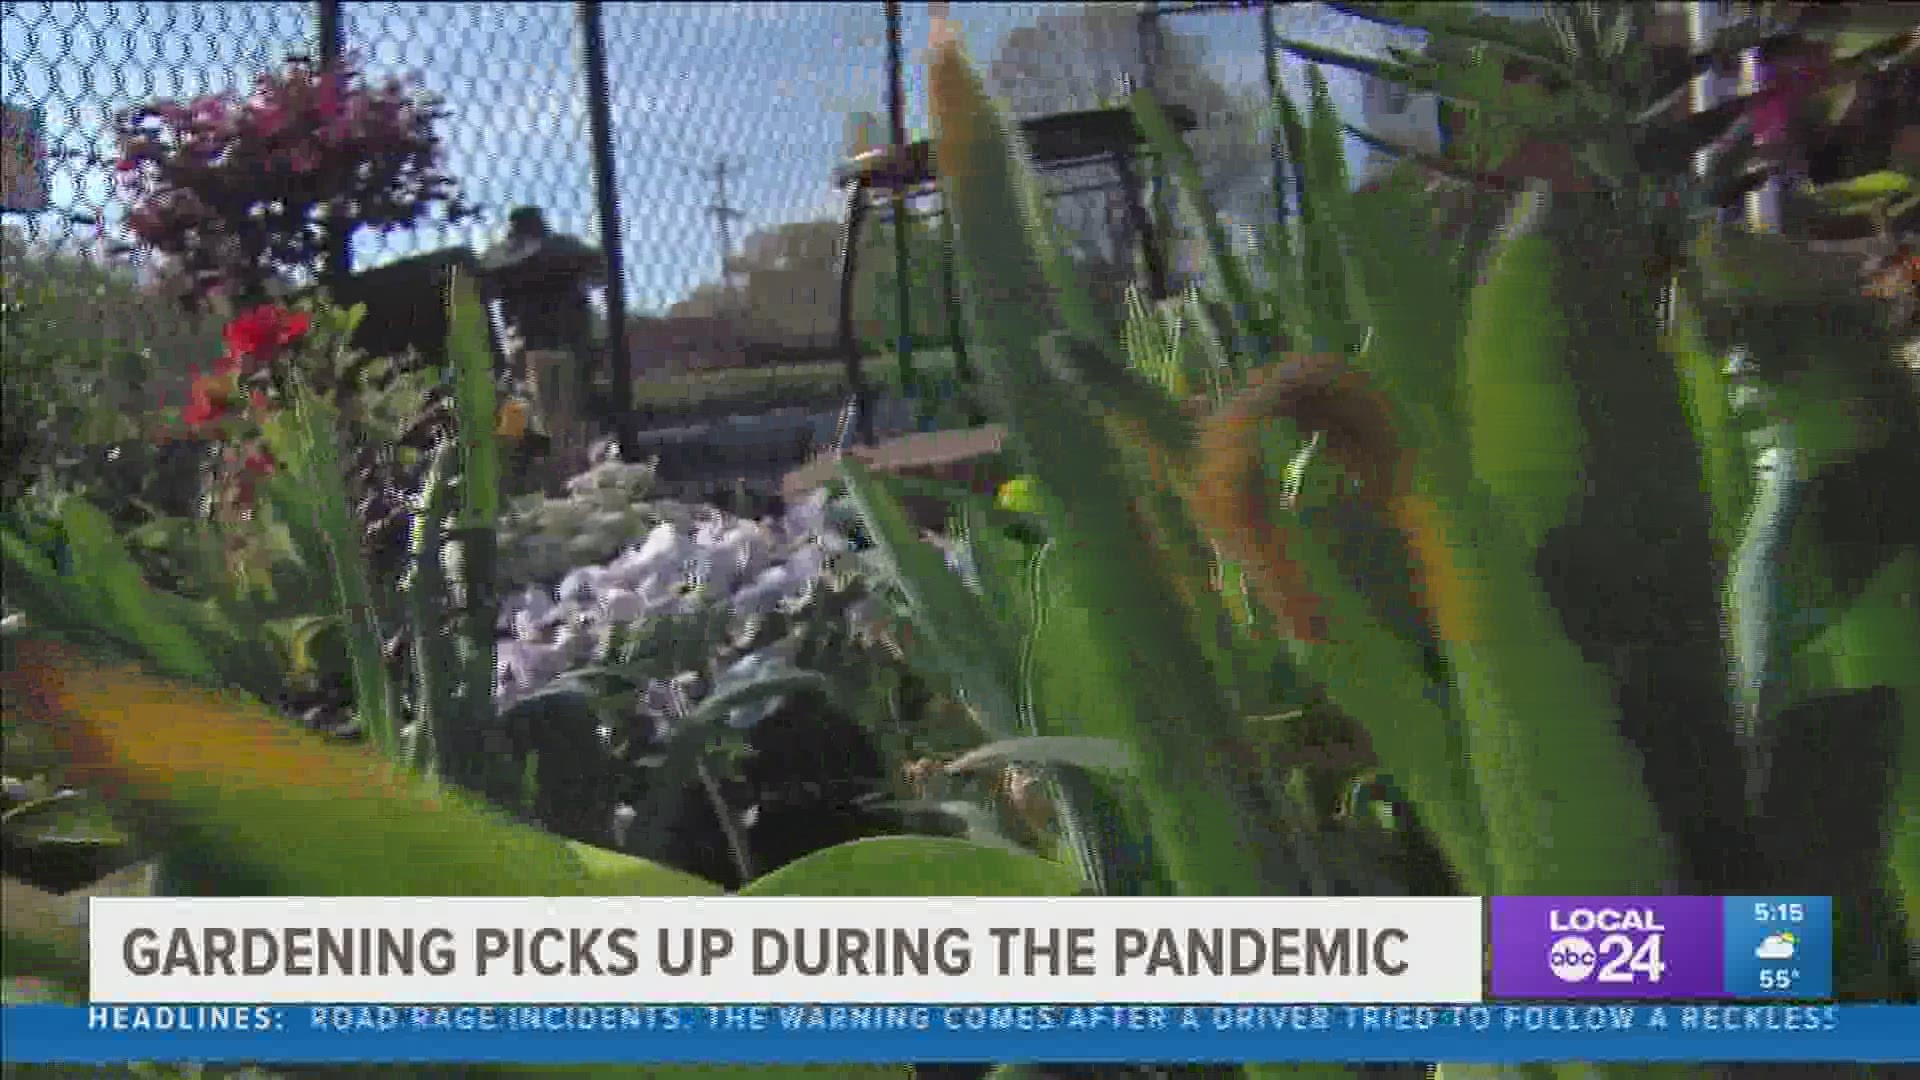 Many people picked up gardening as a hobby during the pandemic. As things open up, they plan to continue spending time in the garden.